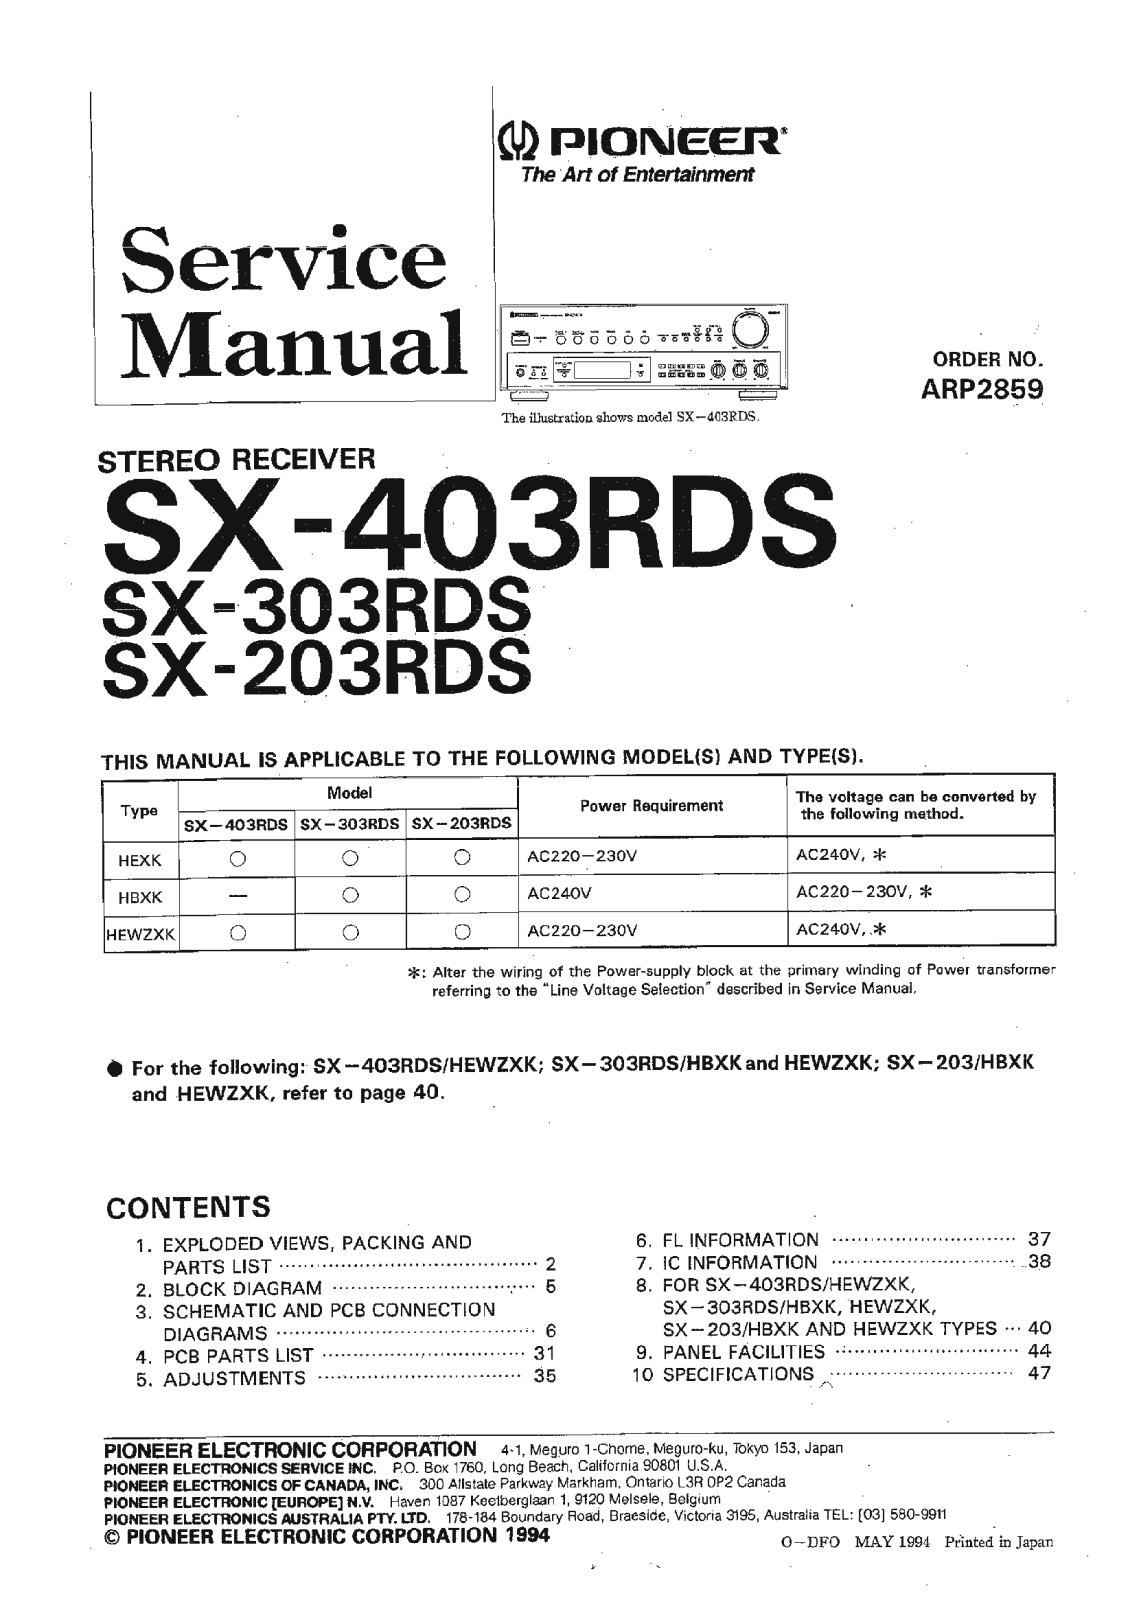 Pioneer SX-203RDS Service Manual